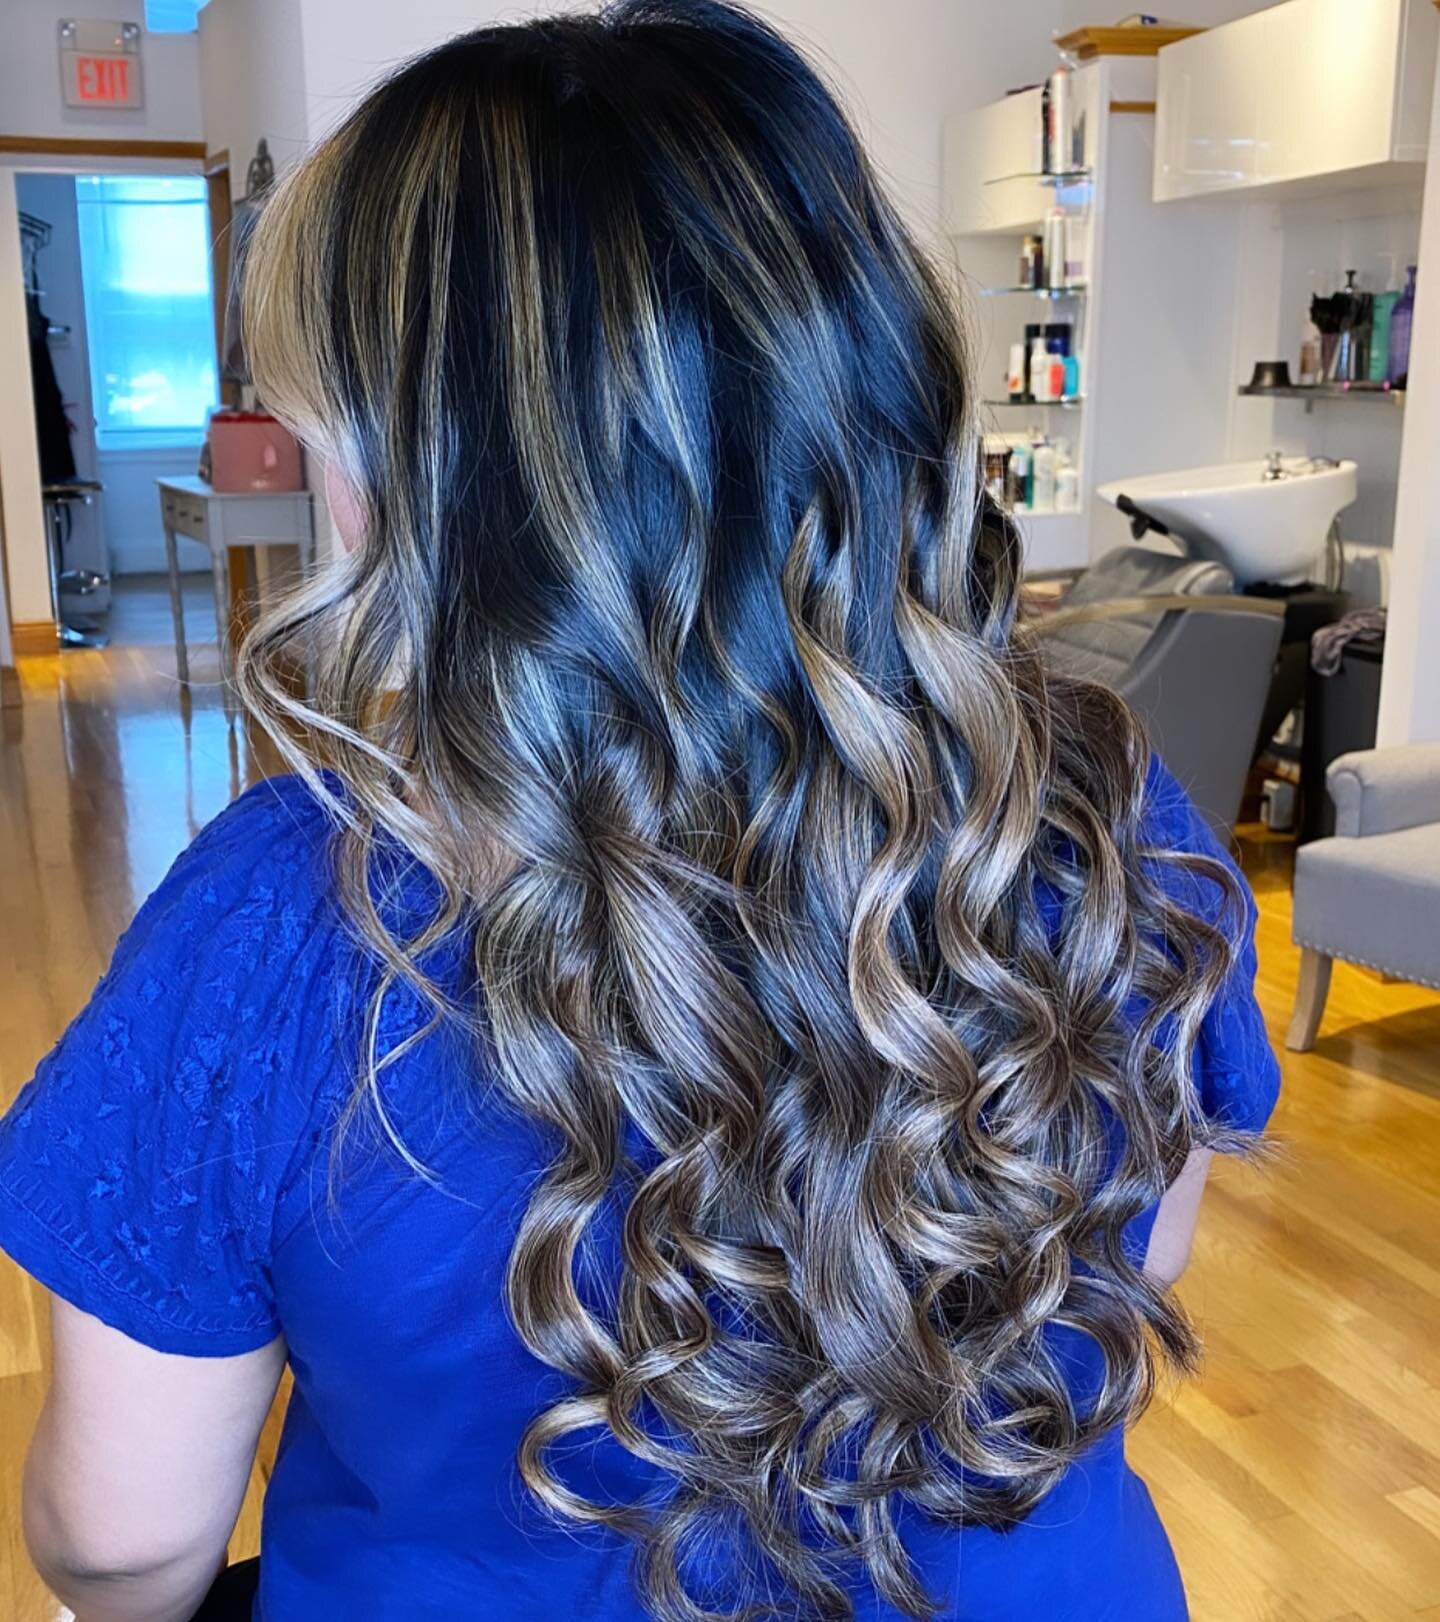 Leaving in Dimension 🤩. I&rsquo;m getting an average of 2-3 requests per day for a Balayage session, 
 Here are images which follow the before and after process transformation. if you swipe left👉🏻. This is the most requests color &amp; technique u